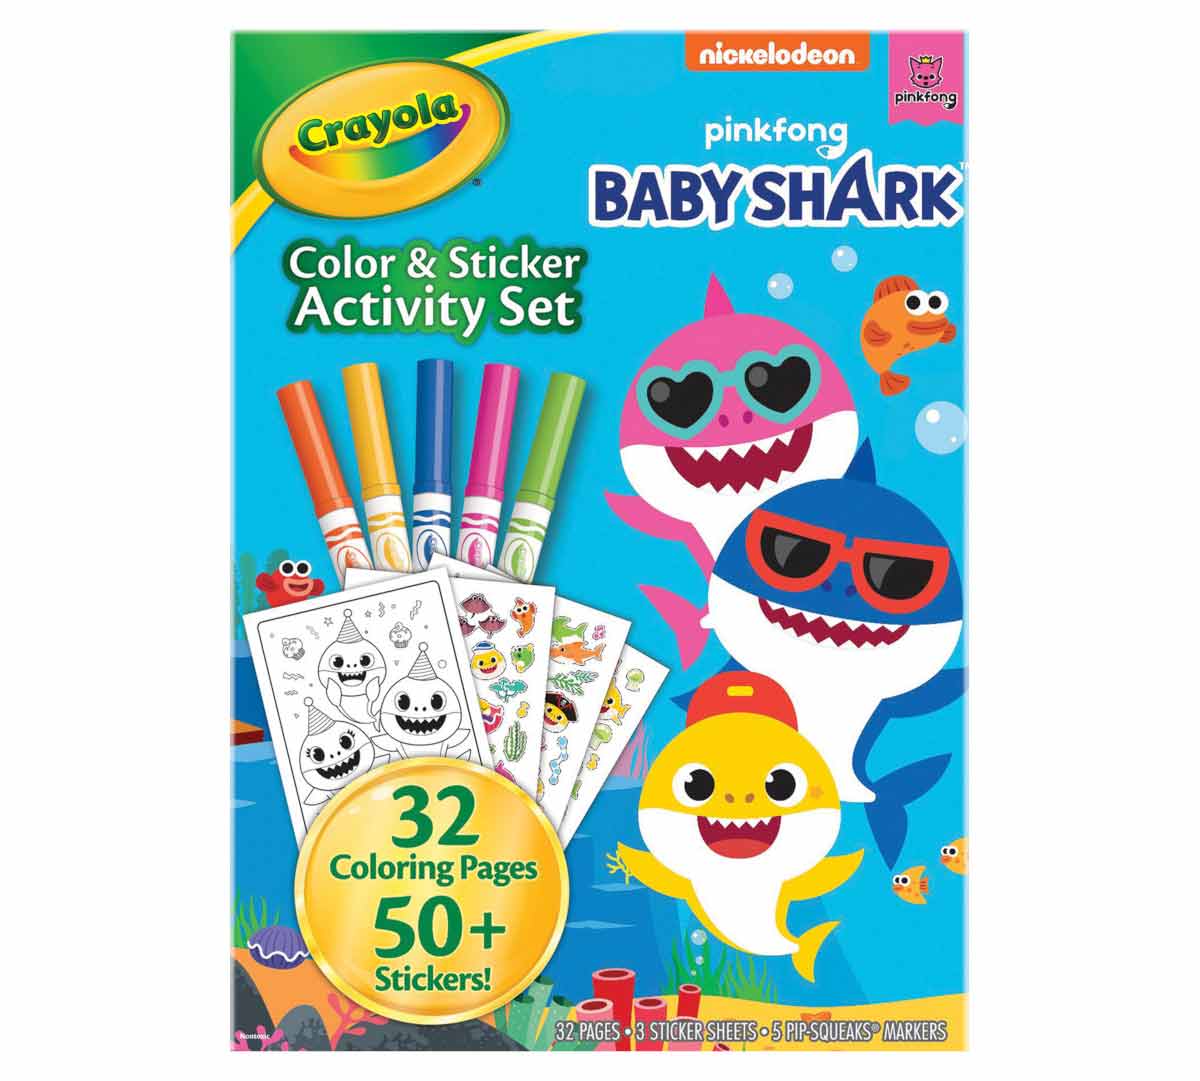 Advertising Adult Coloring Book and 6 Color Pencil Set To-Gos (16 Sheets), Toys and Fun